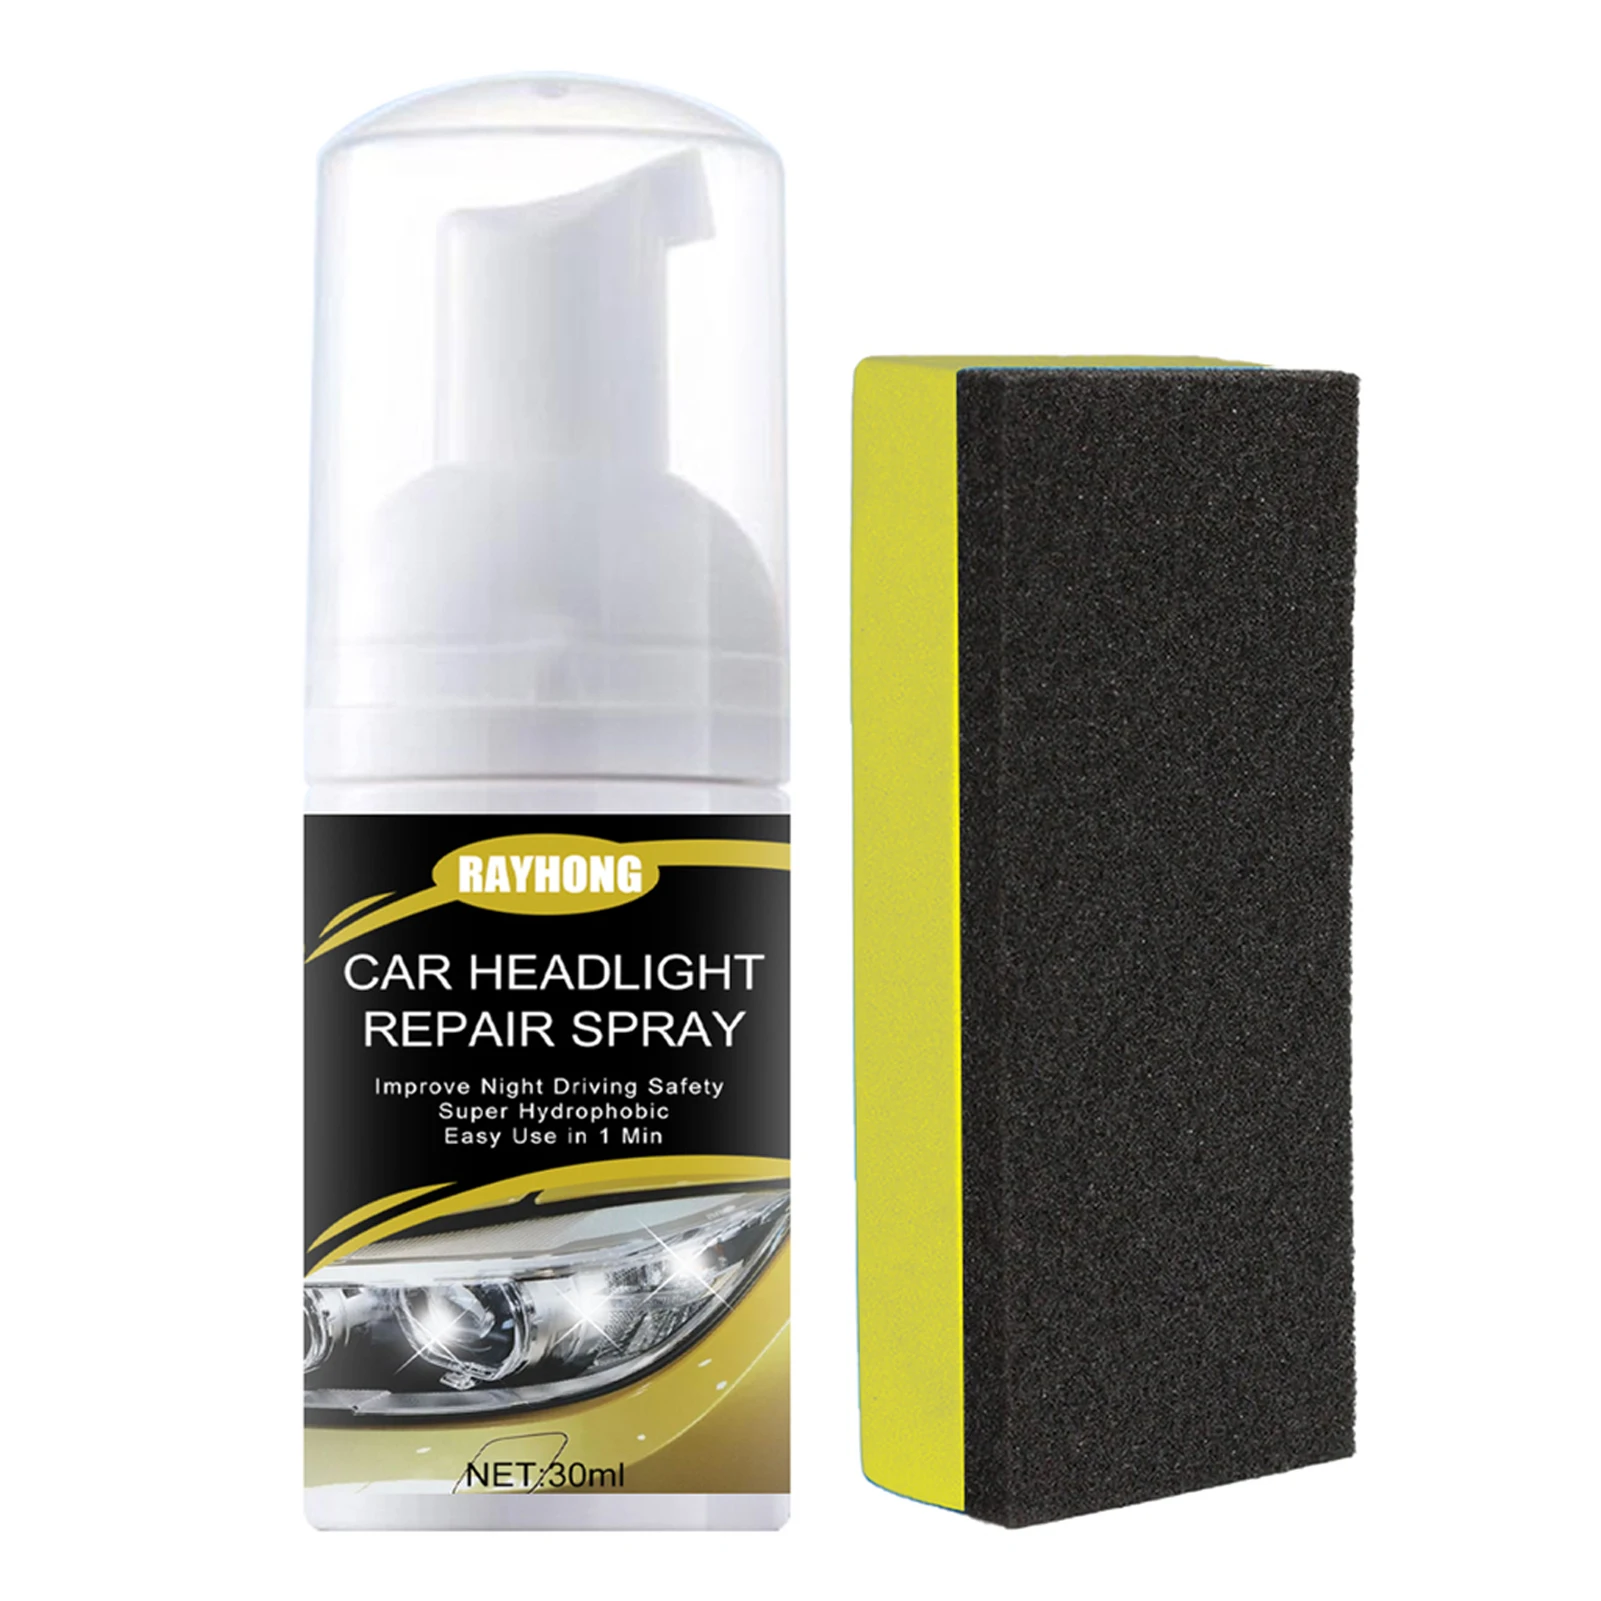 

Car Headlight Cleaning Spray Household Oil Spray Cleaning Car Headlamp Cleaning Spray Repair Renewal Polish For Yellowing